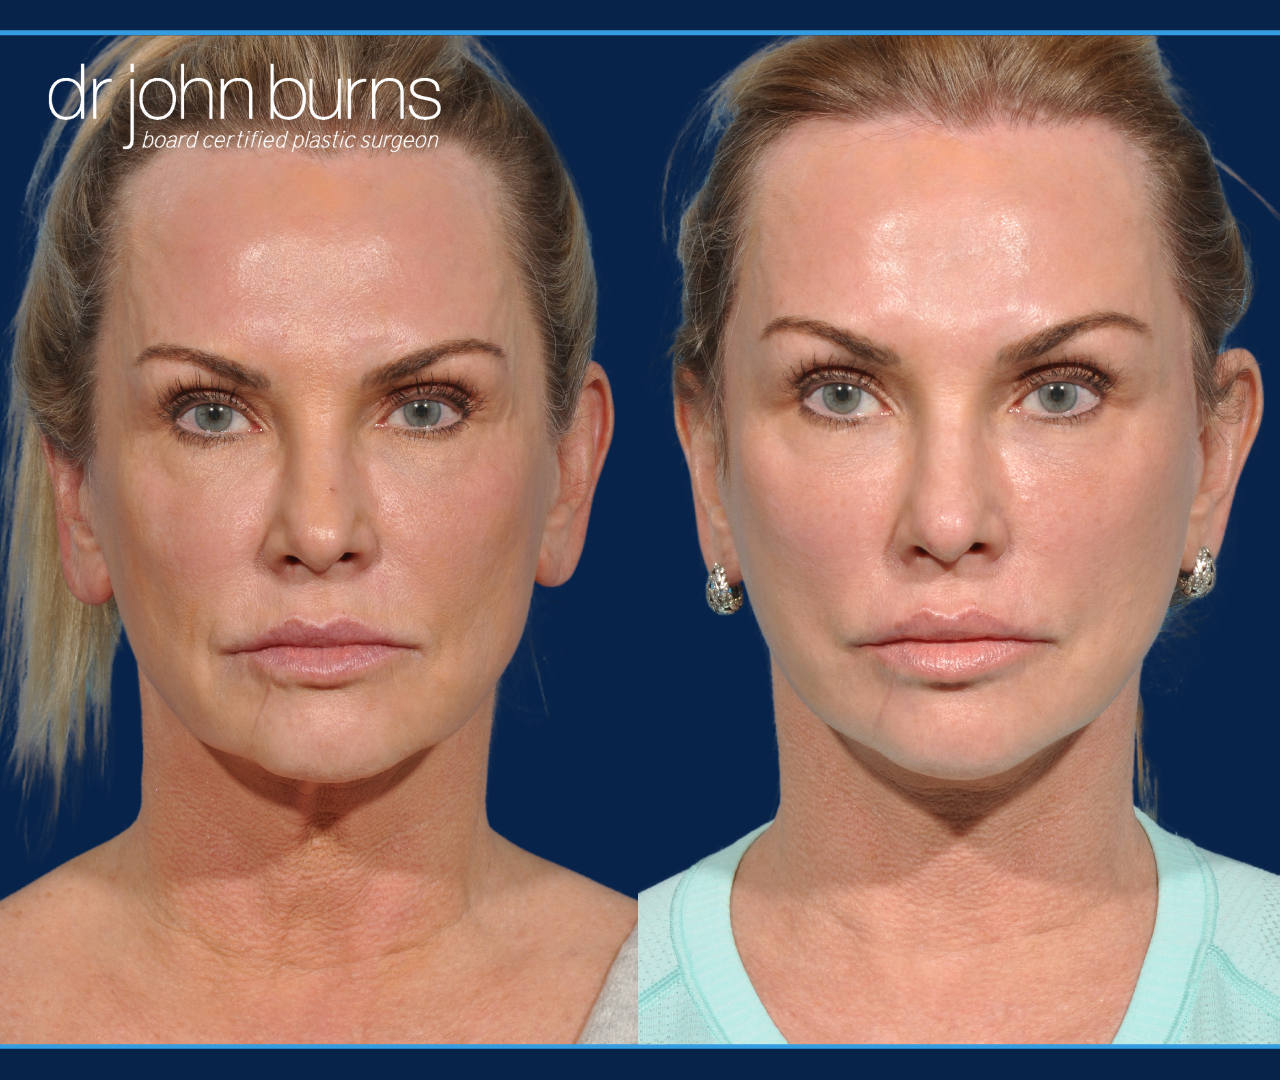 Facelift Revision | Dallas Facelift with  "Lift and Fill" Facelift with fat grafting to face by Dr. John Burns